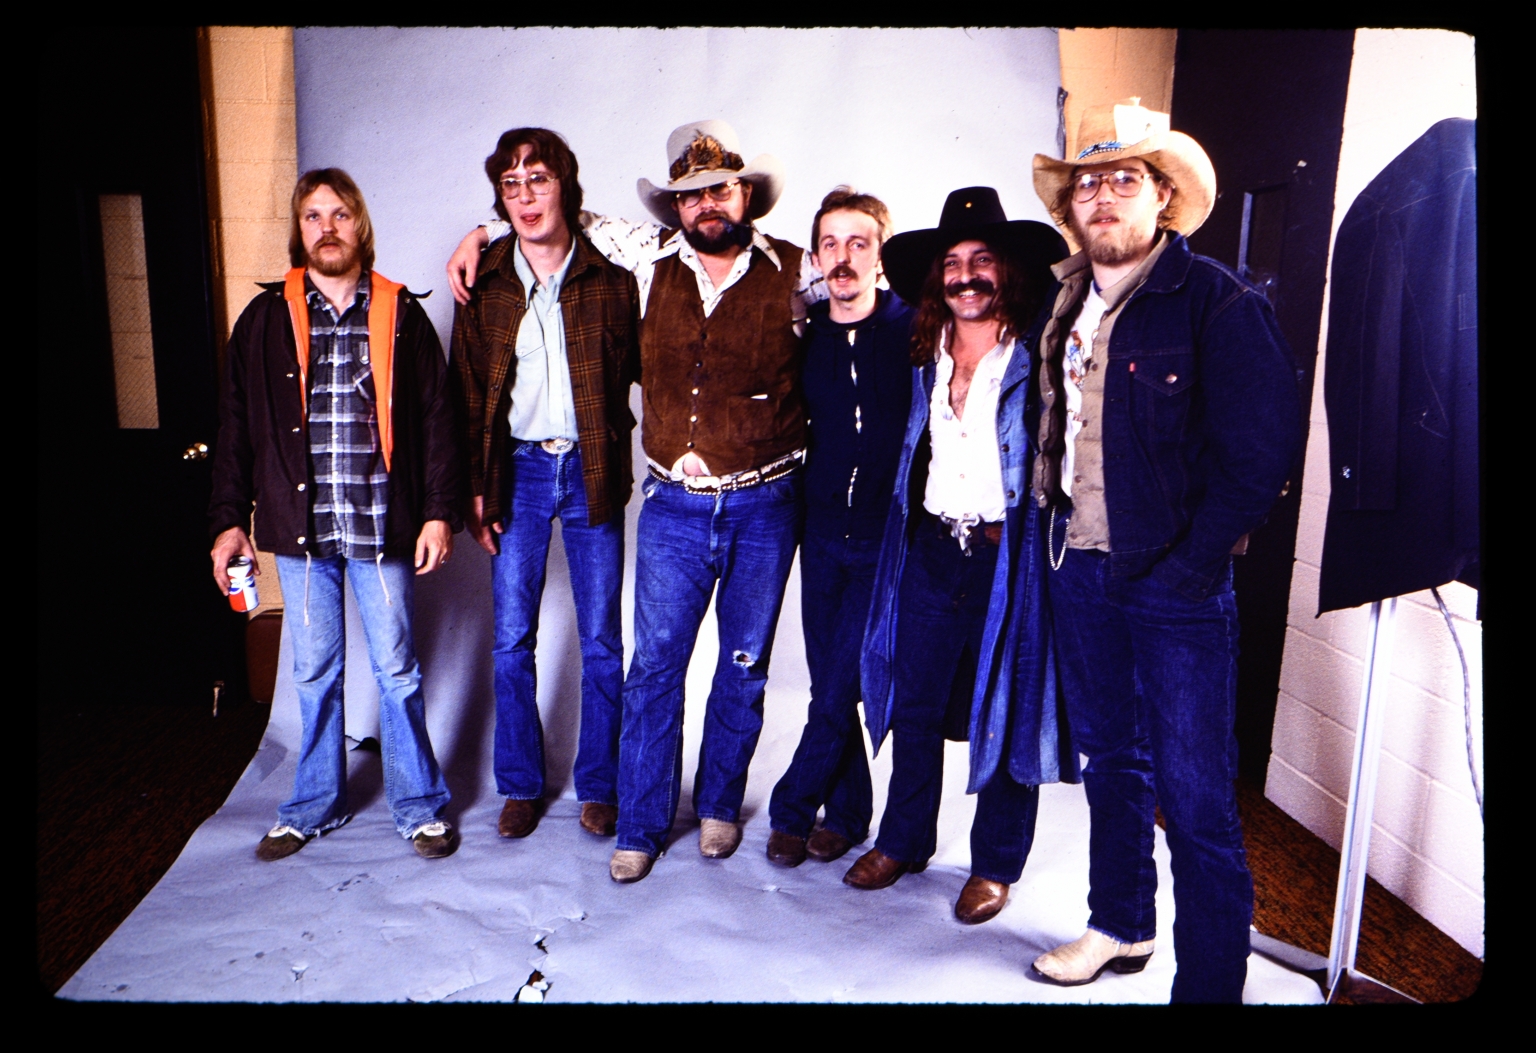 Charlie Daniels and Dickie Betts